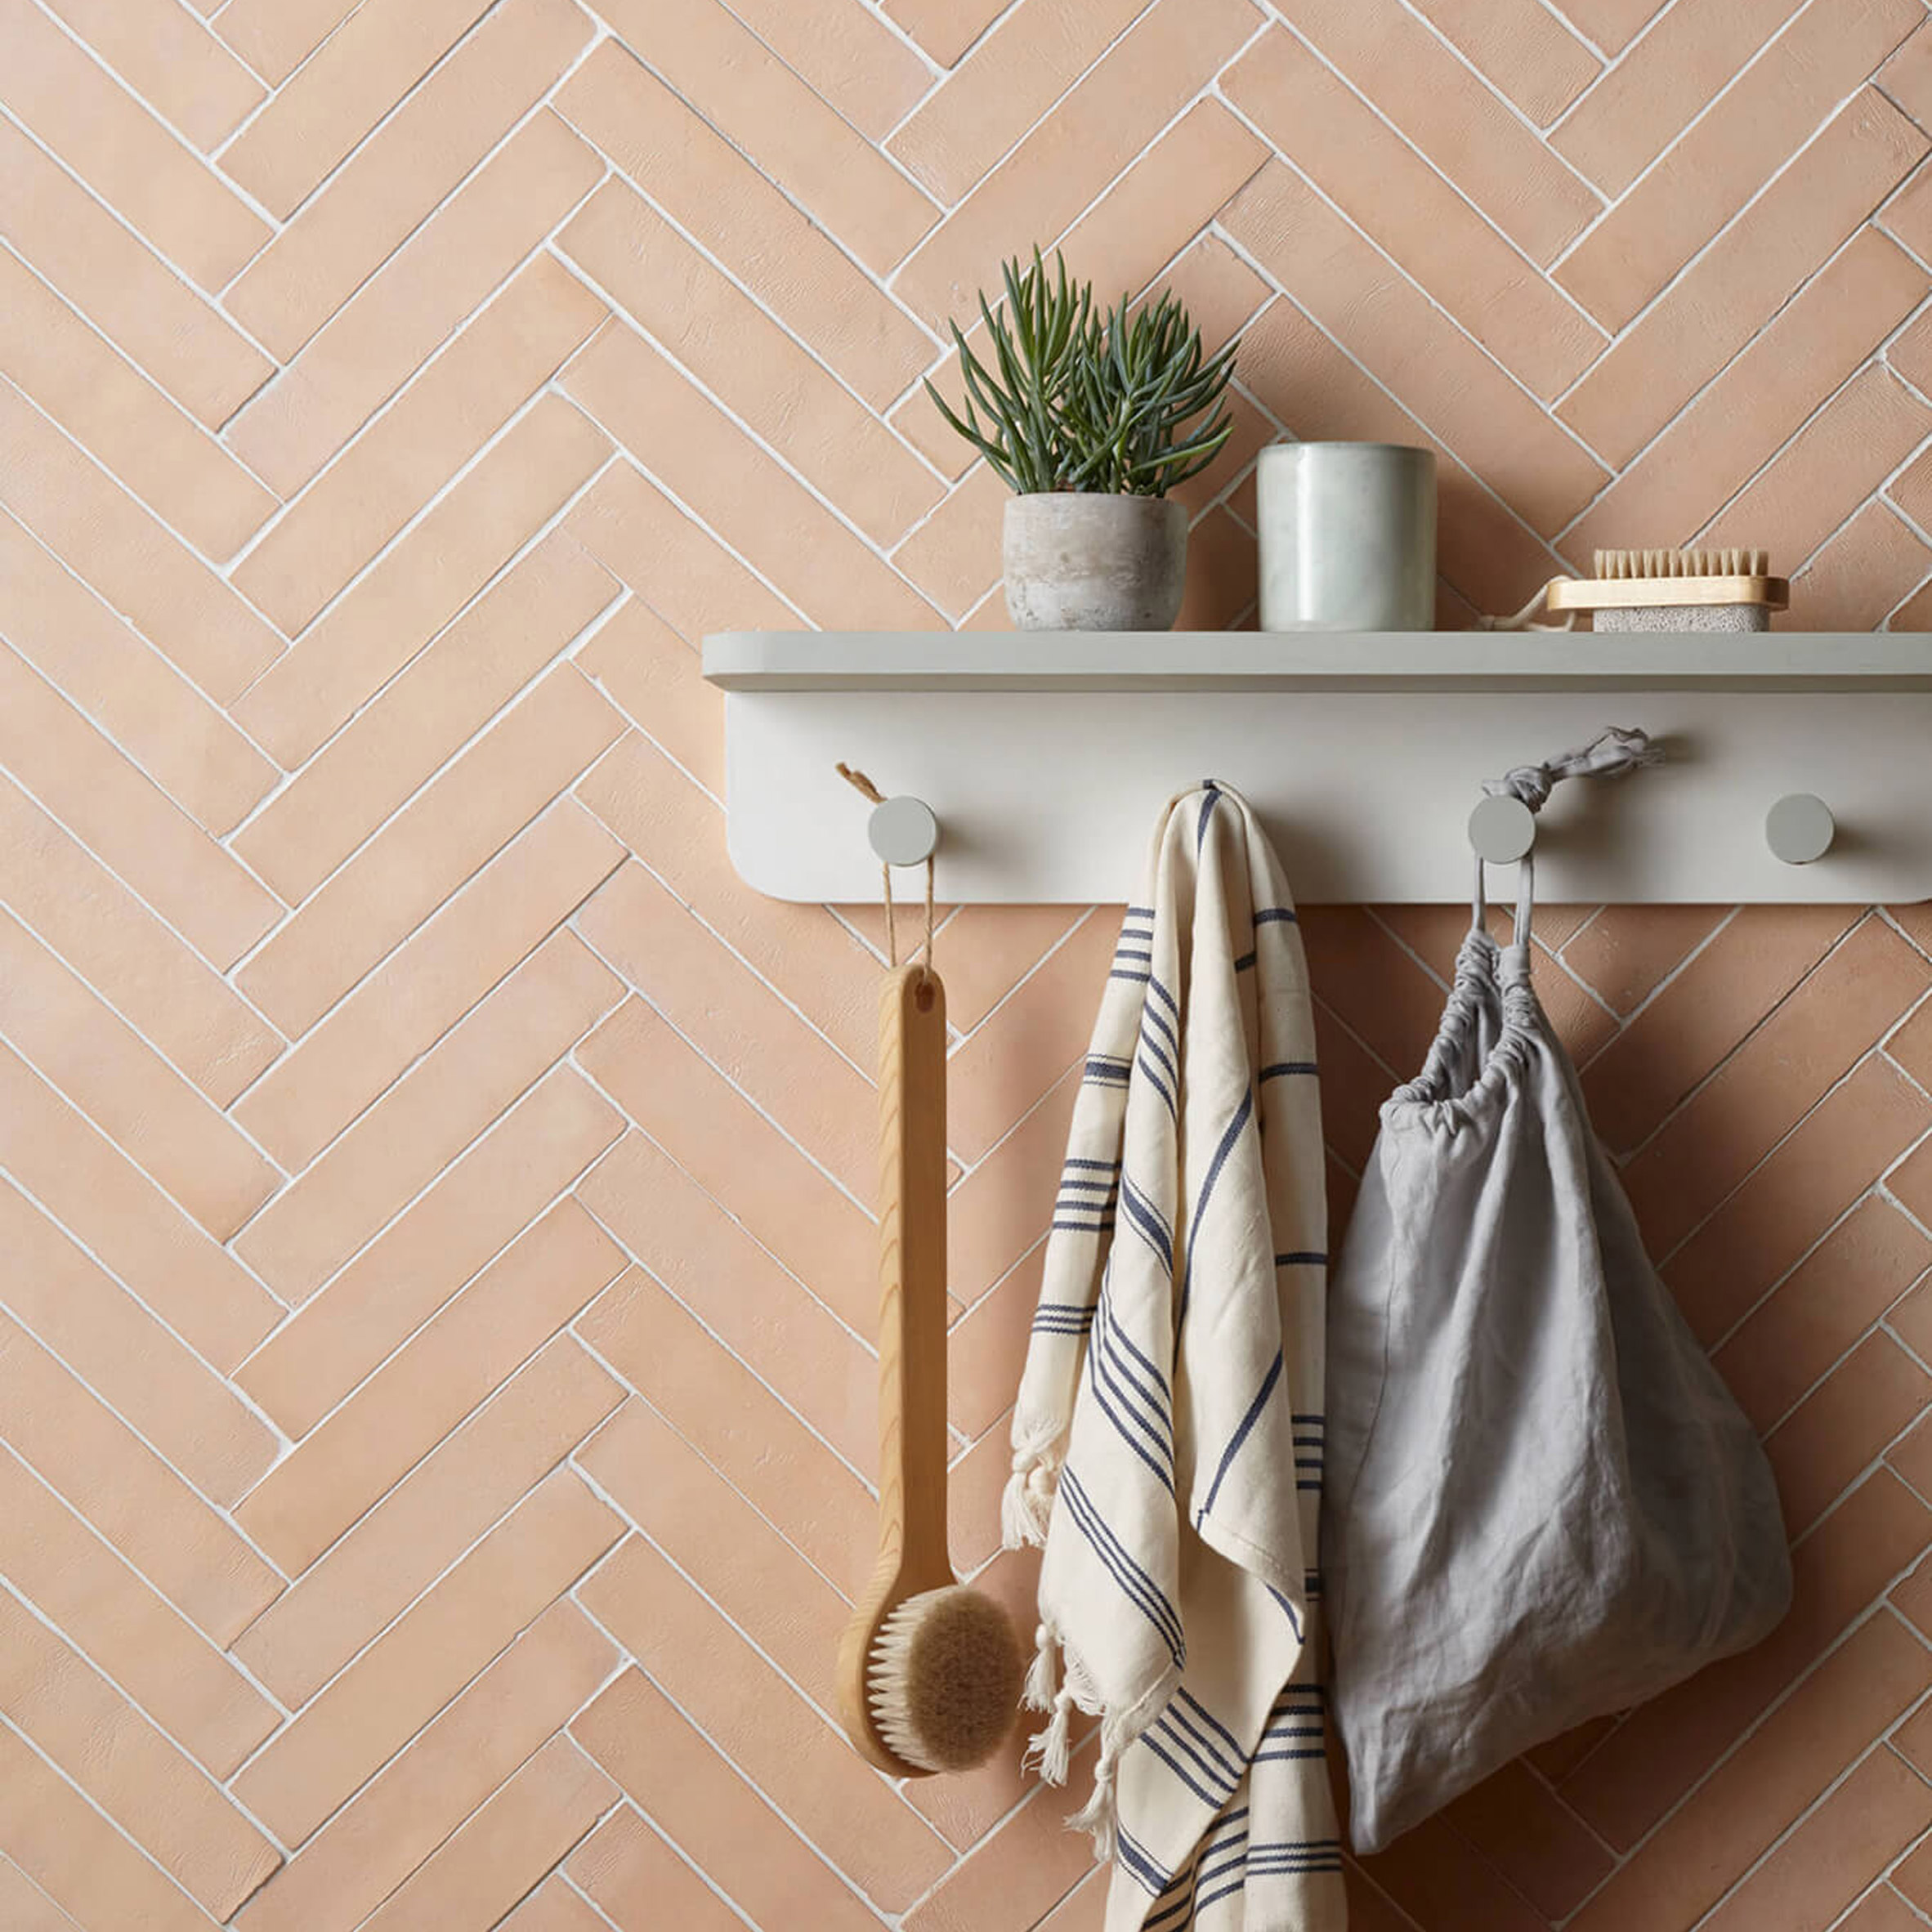 Clay rectangle tiles from New Terracotta on a wall in a parquet pattern